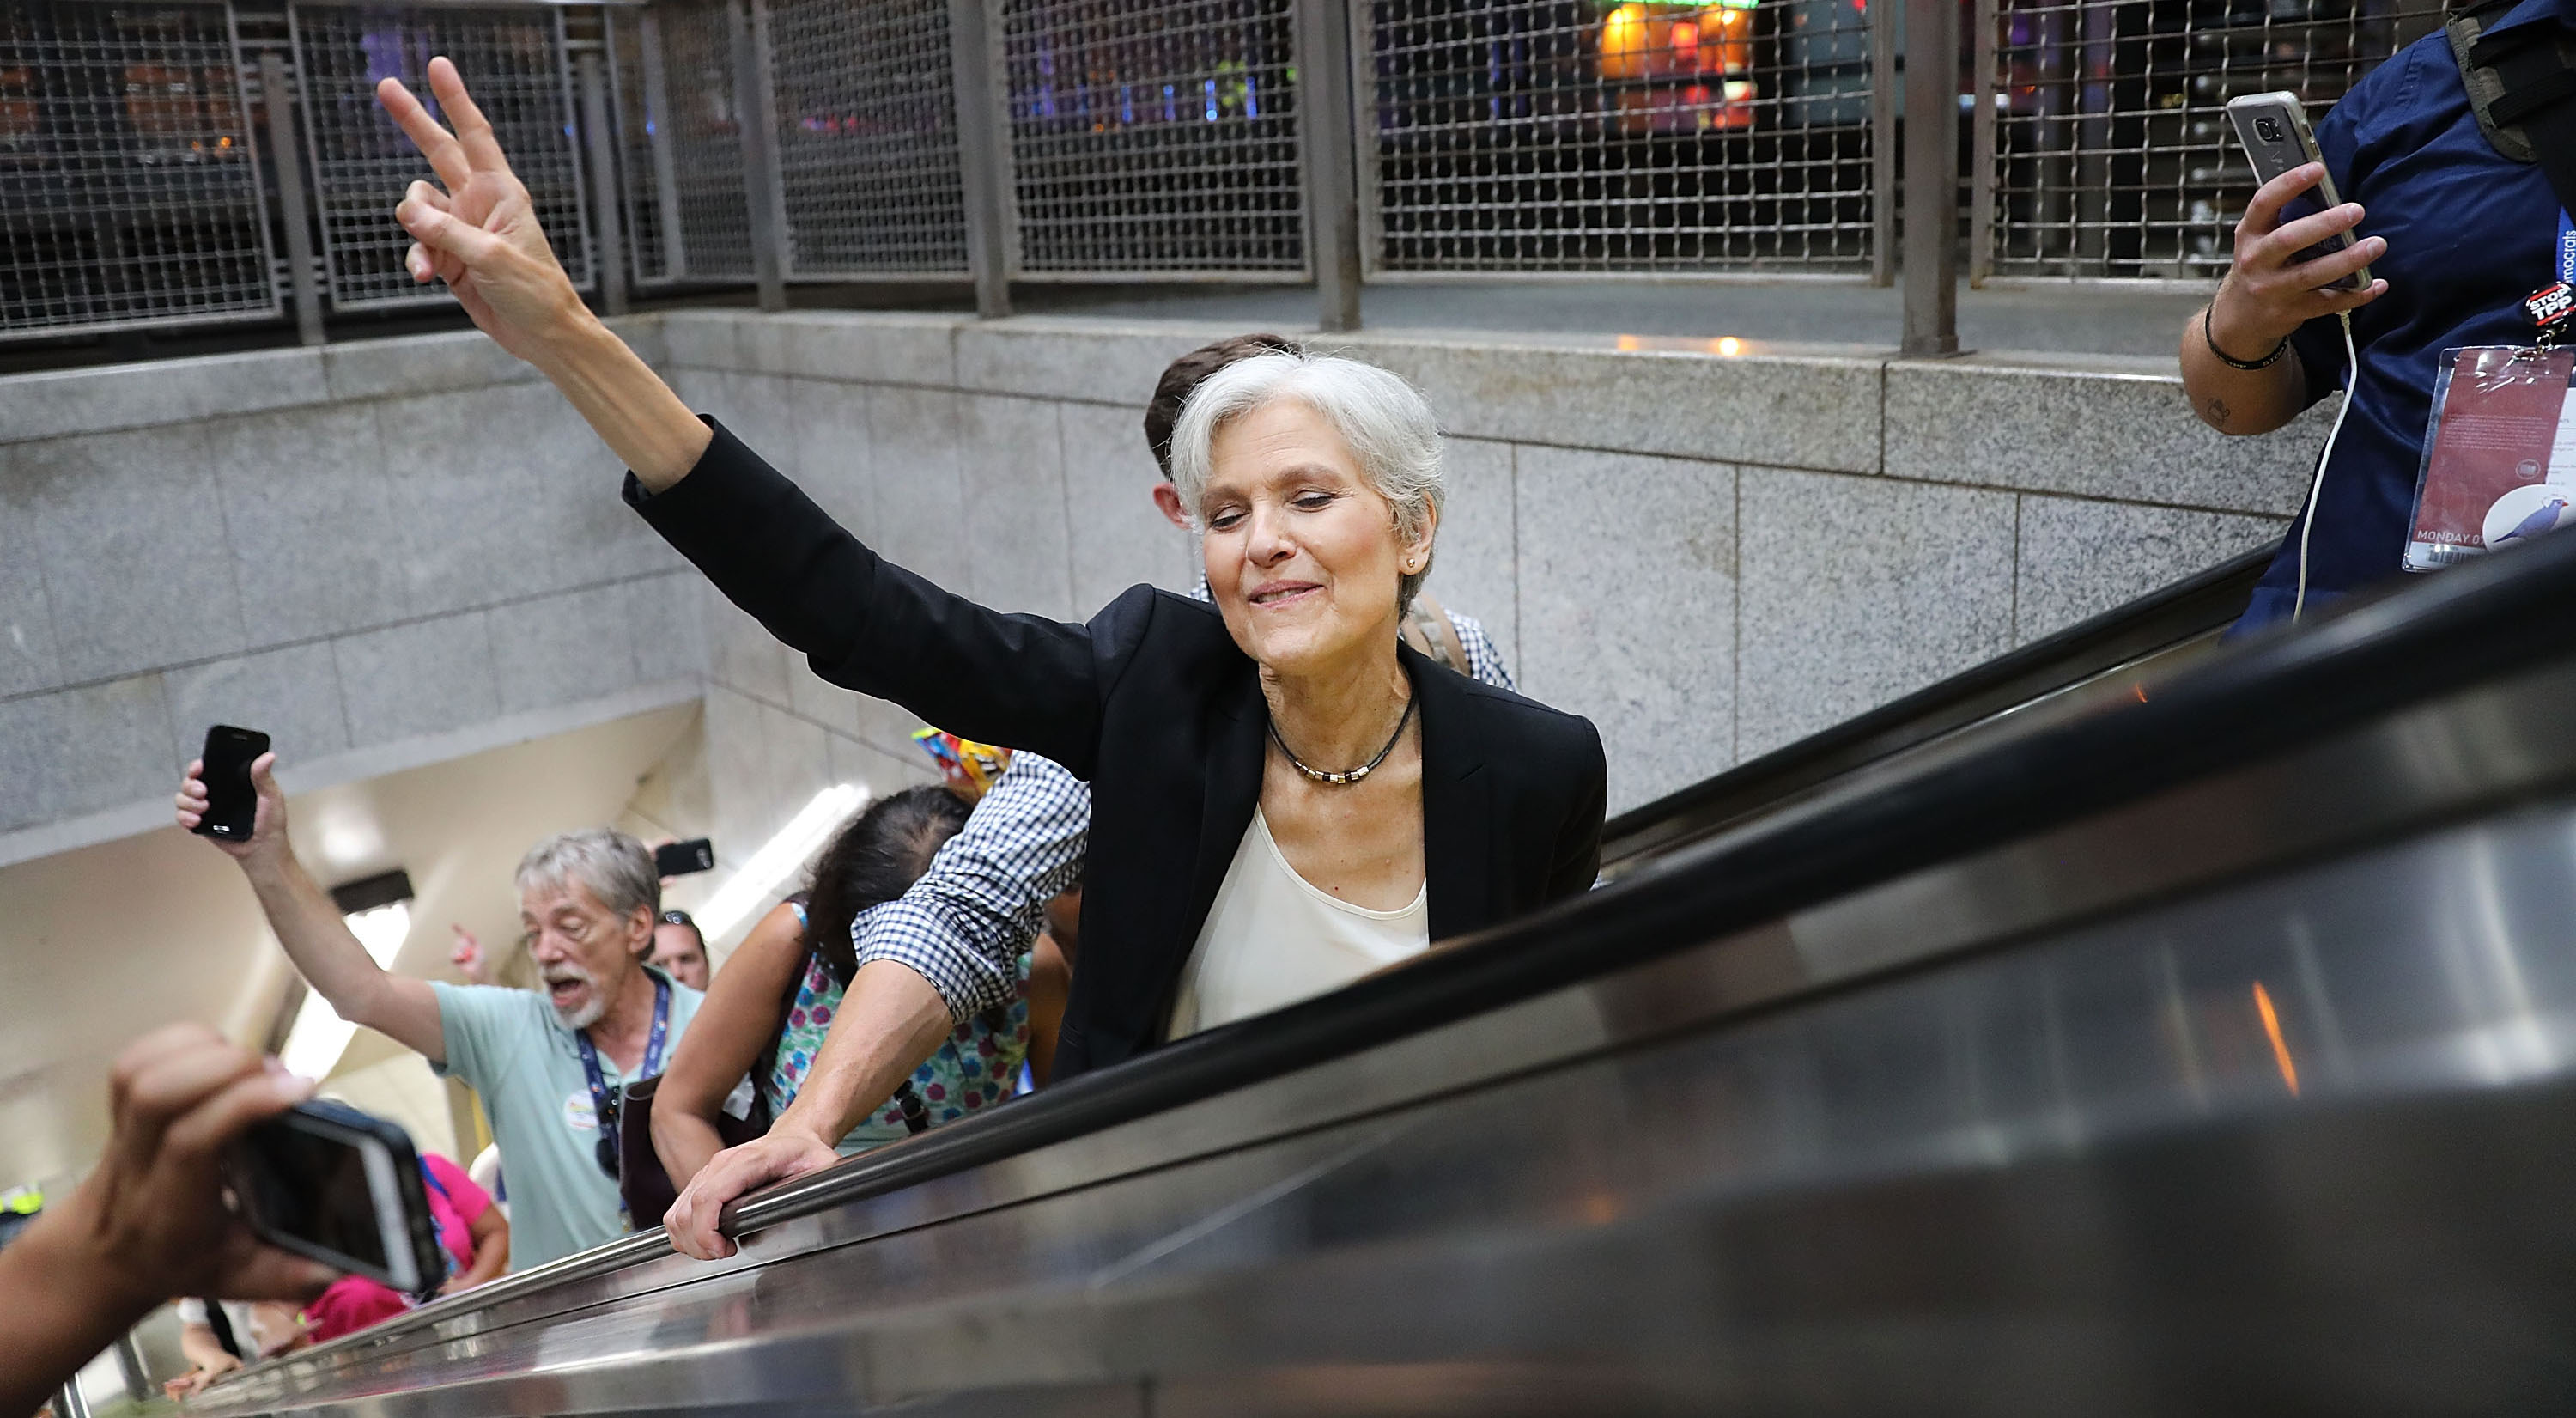 Green Party candidate Jill Stein speaks with supporters in downtown Philadelphia during events at the Democratic National Convention on July 26, 2016.
